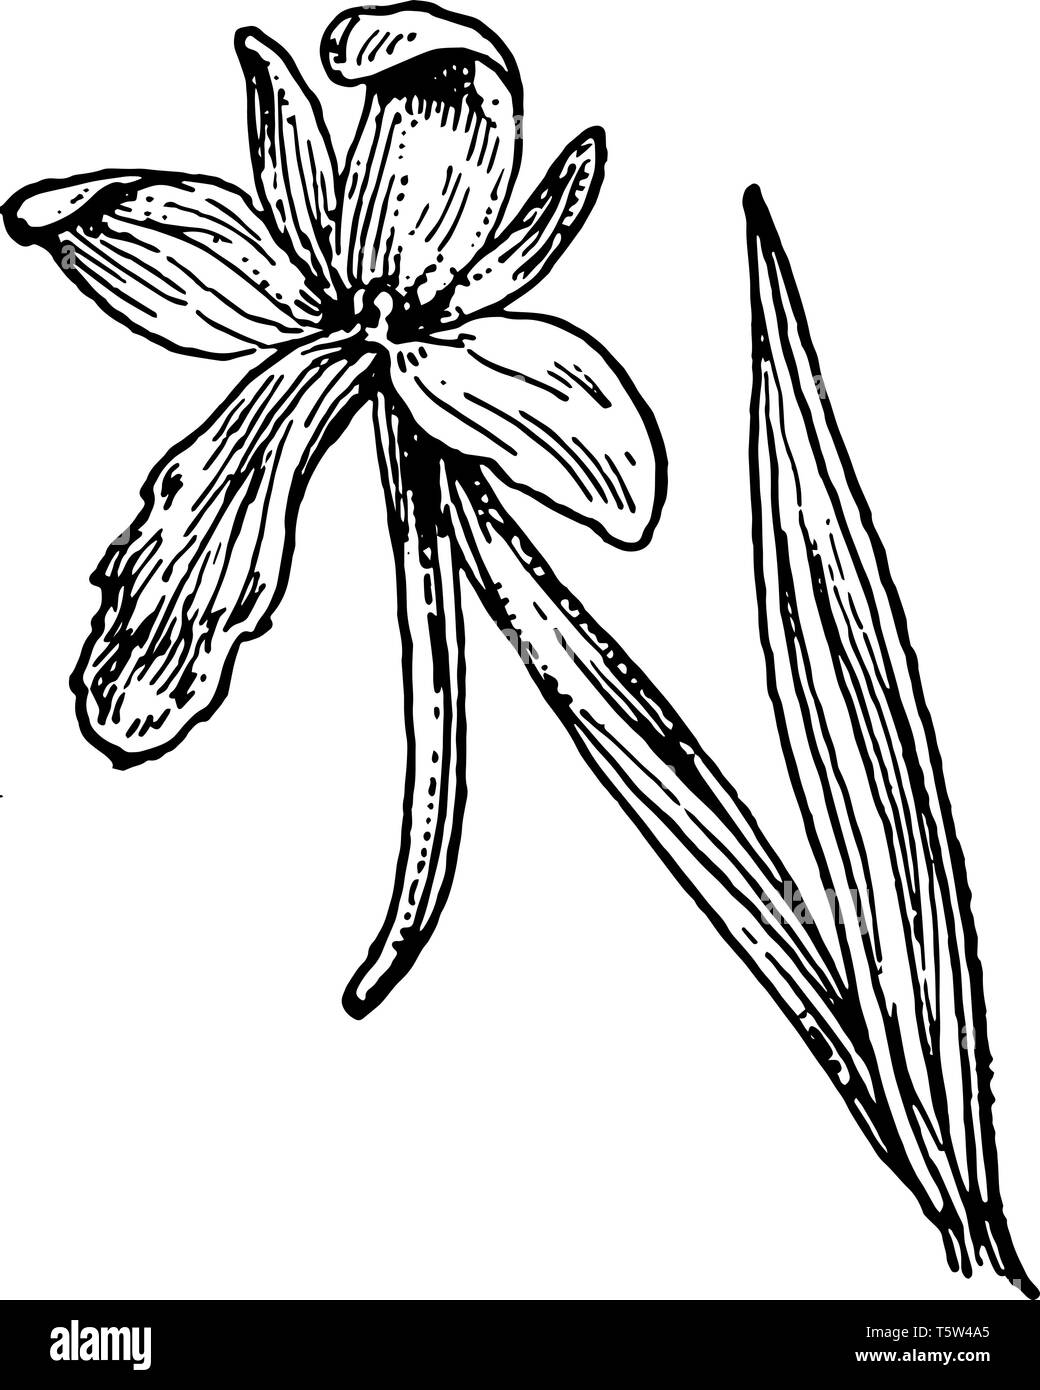 Habenaria integra is commonly known as Platanthera integra is yellow fringeless orchid. It is a member of orchid family with yellow flowers and is nat Stock Vector